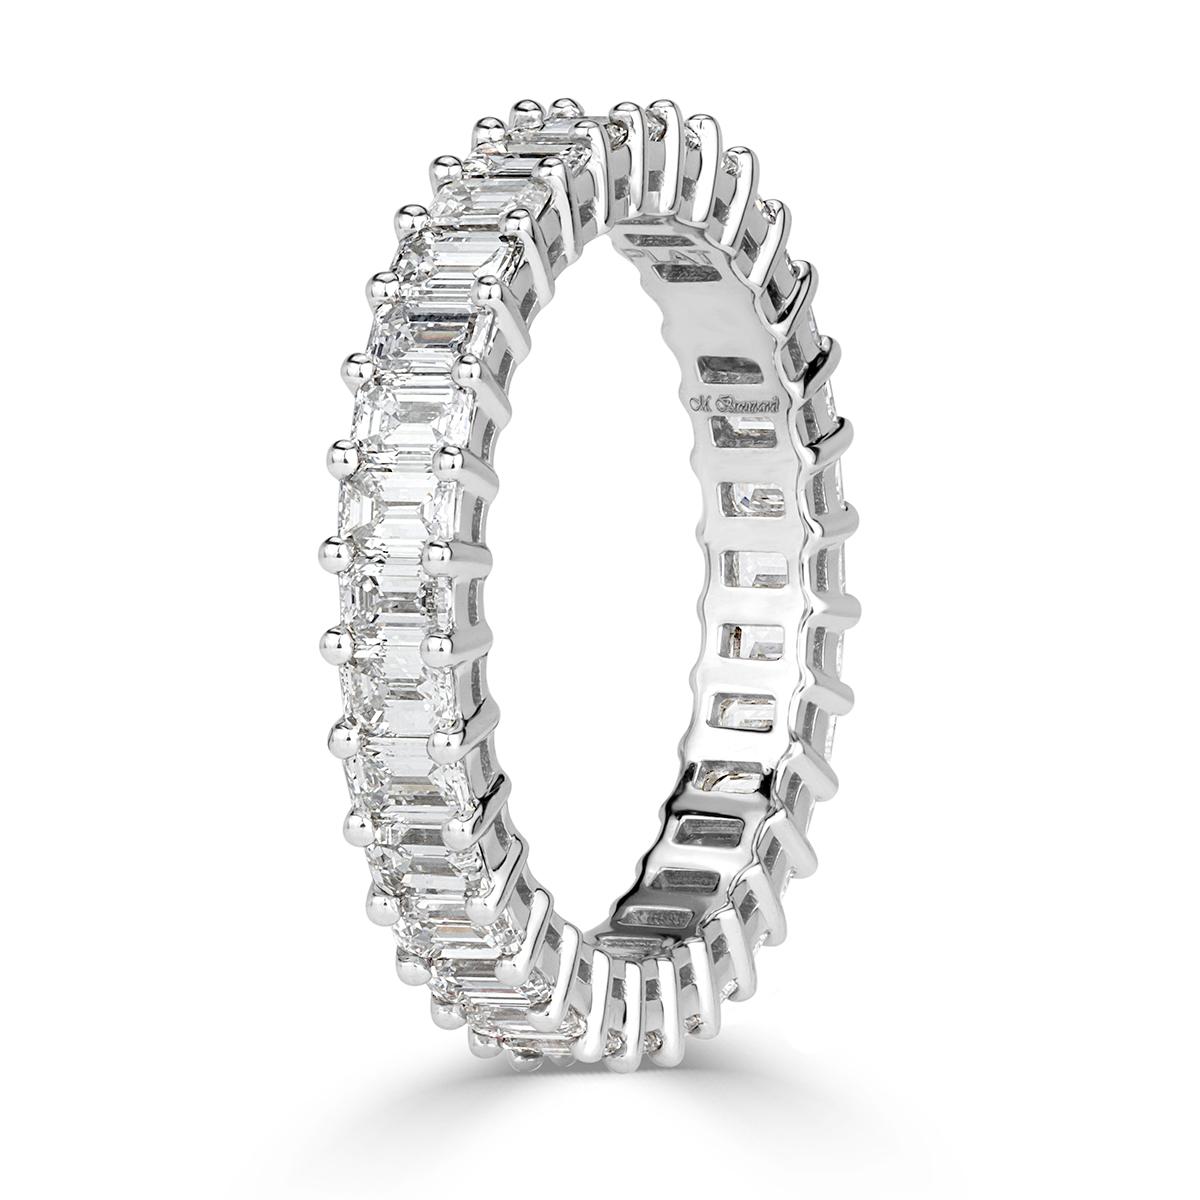 Created in 18k white gold, this ravishing diamond eternity band showcases 2.70ct of emerald cut diamonds graded at E-F, VVS2-VS1. They are seamlessly matched and set in a classic basket setting style. All eternity bands are shown in a size 6.5. We